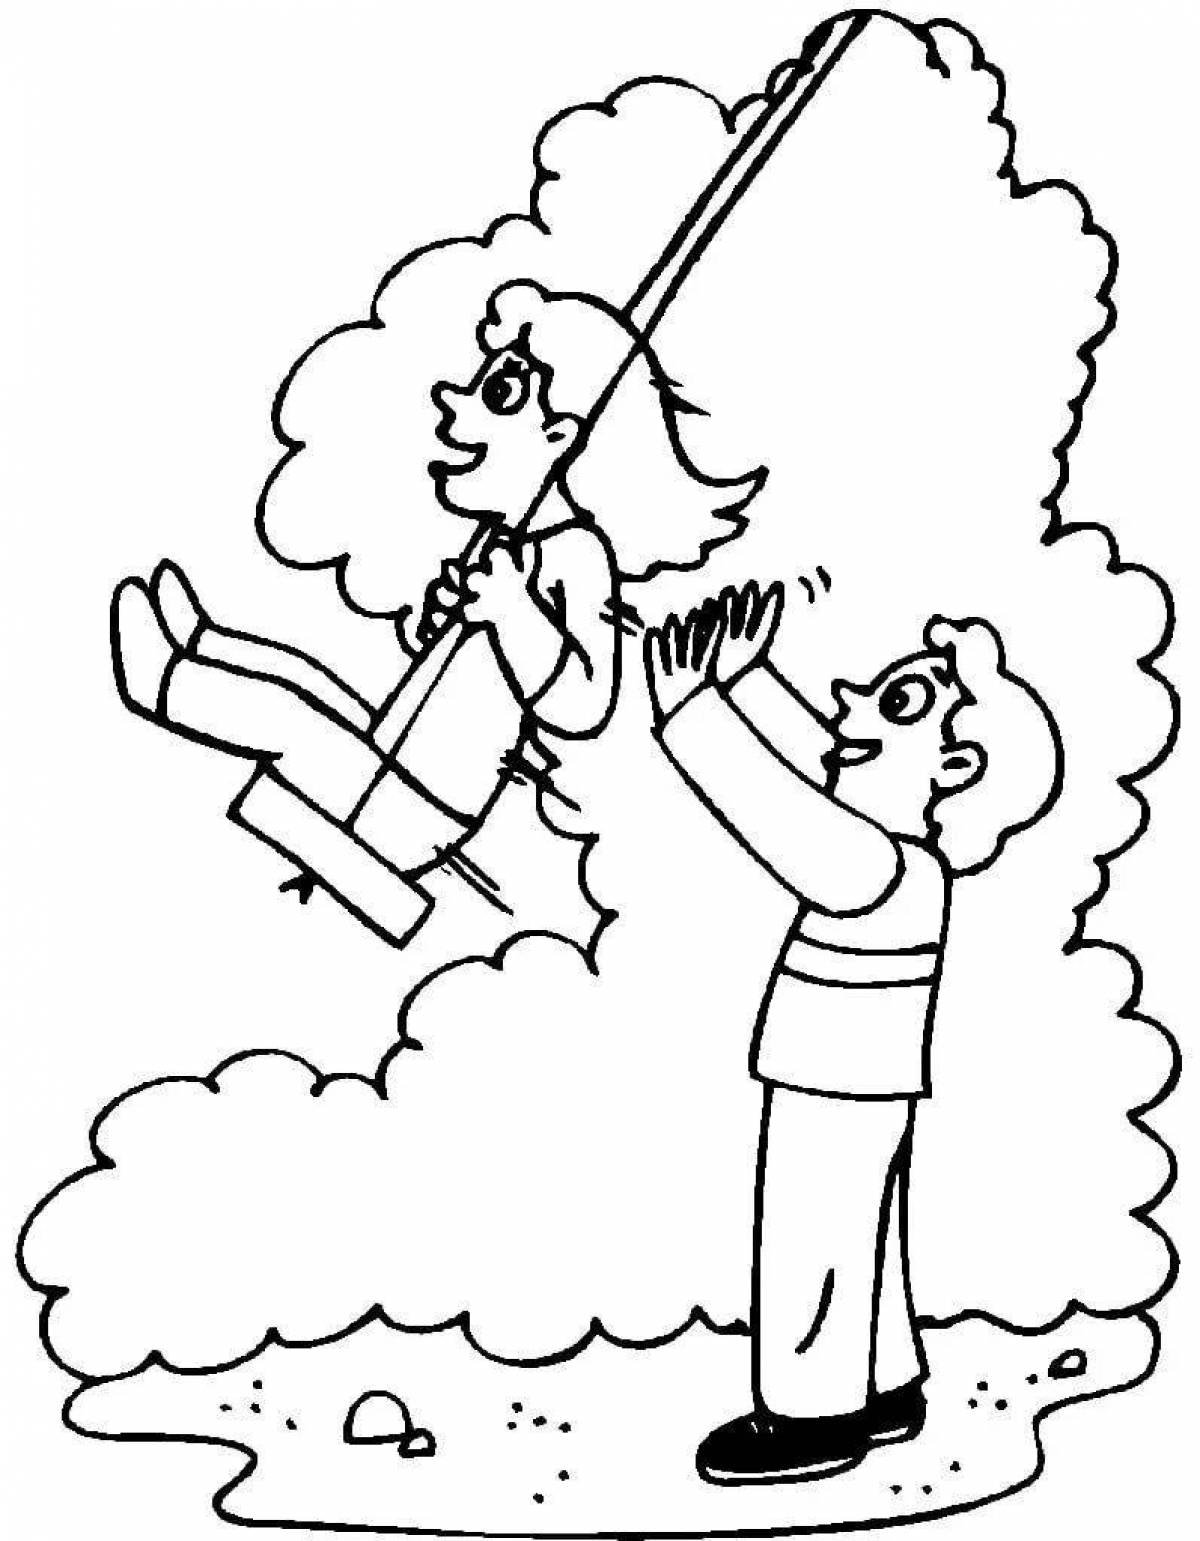 Animated Baby Swing Coloring Page